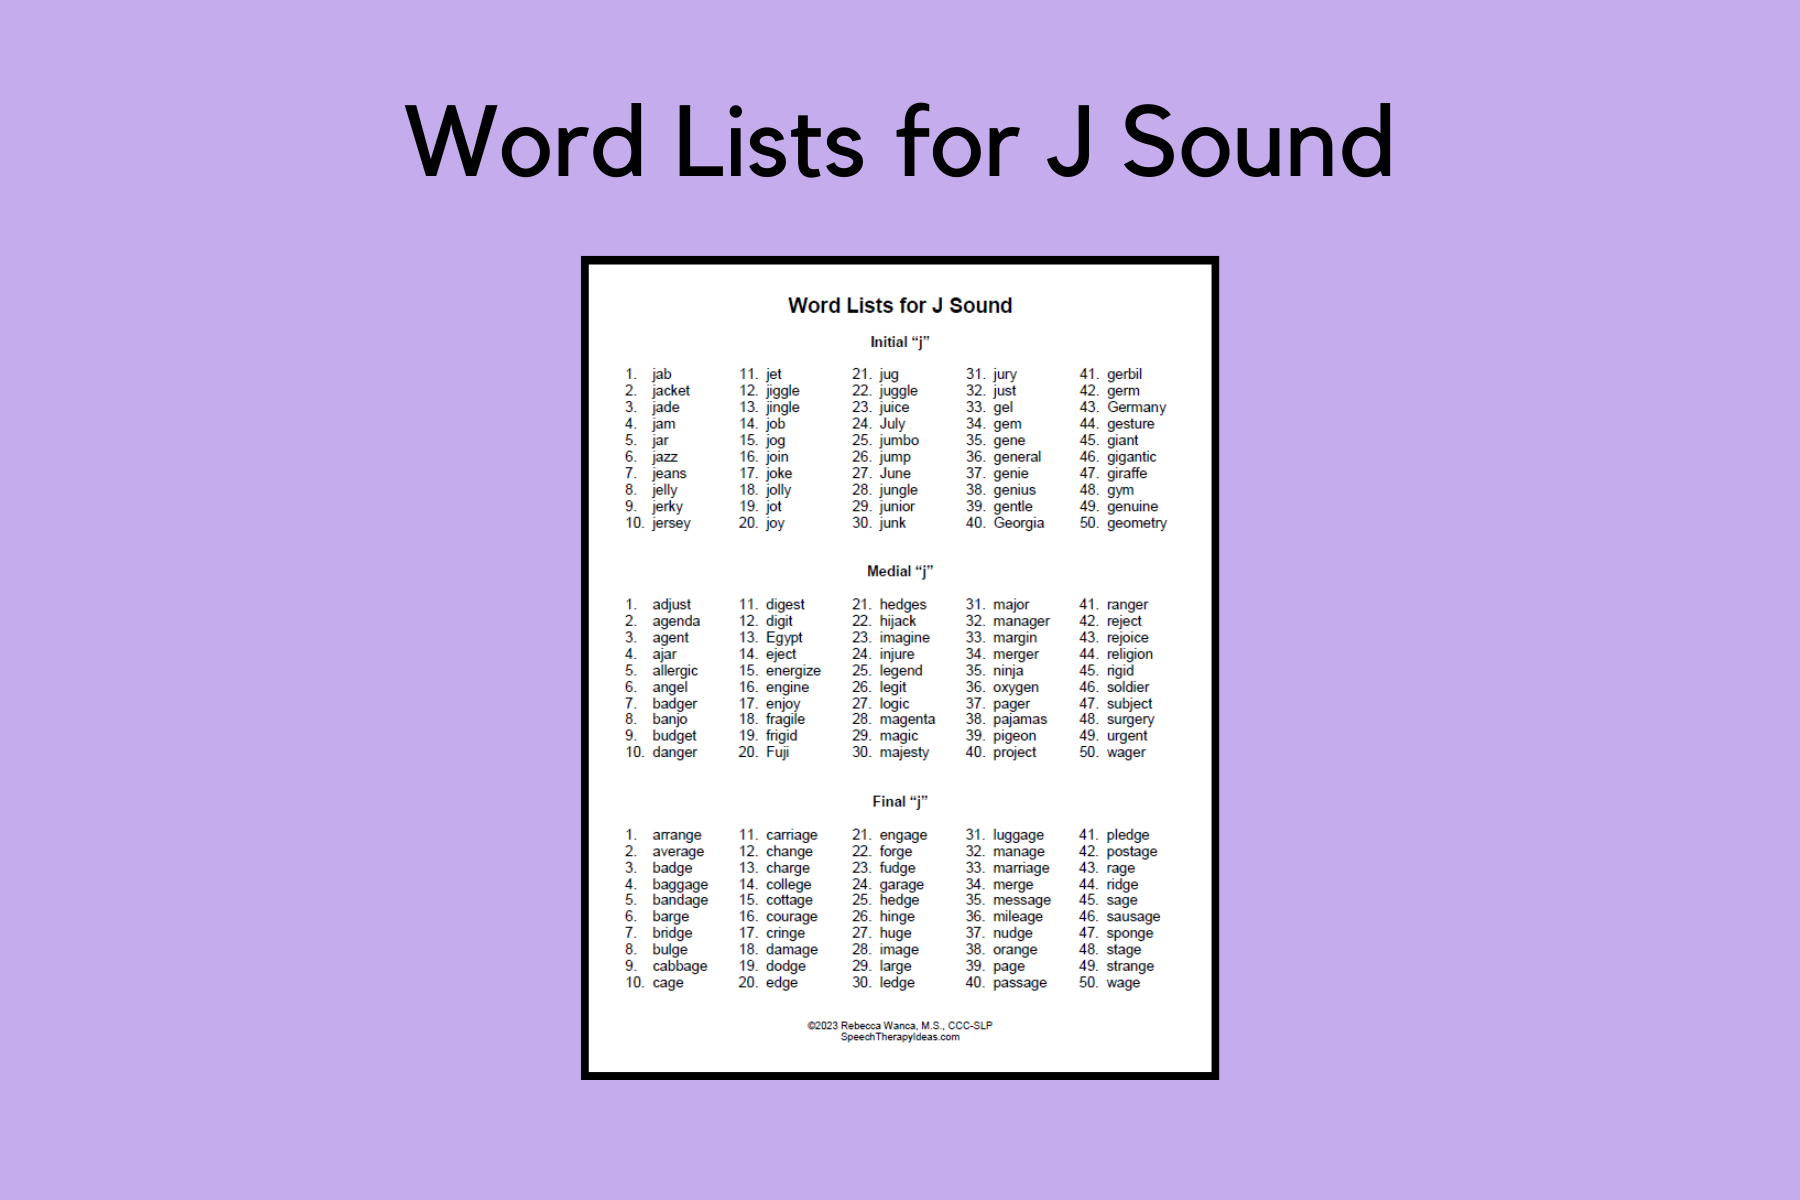 Word Lists for J Sound